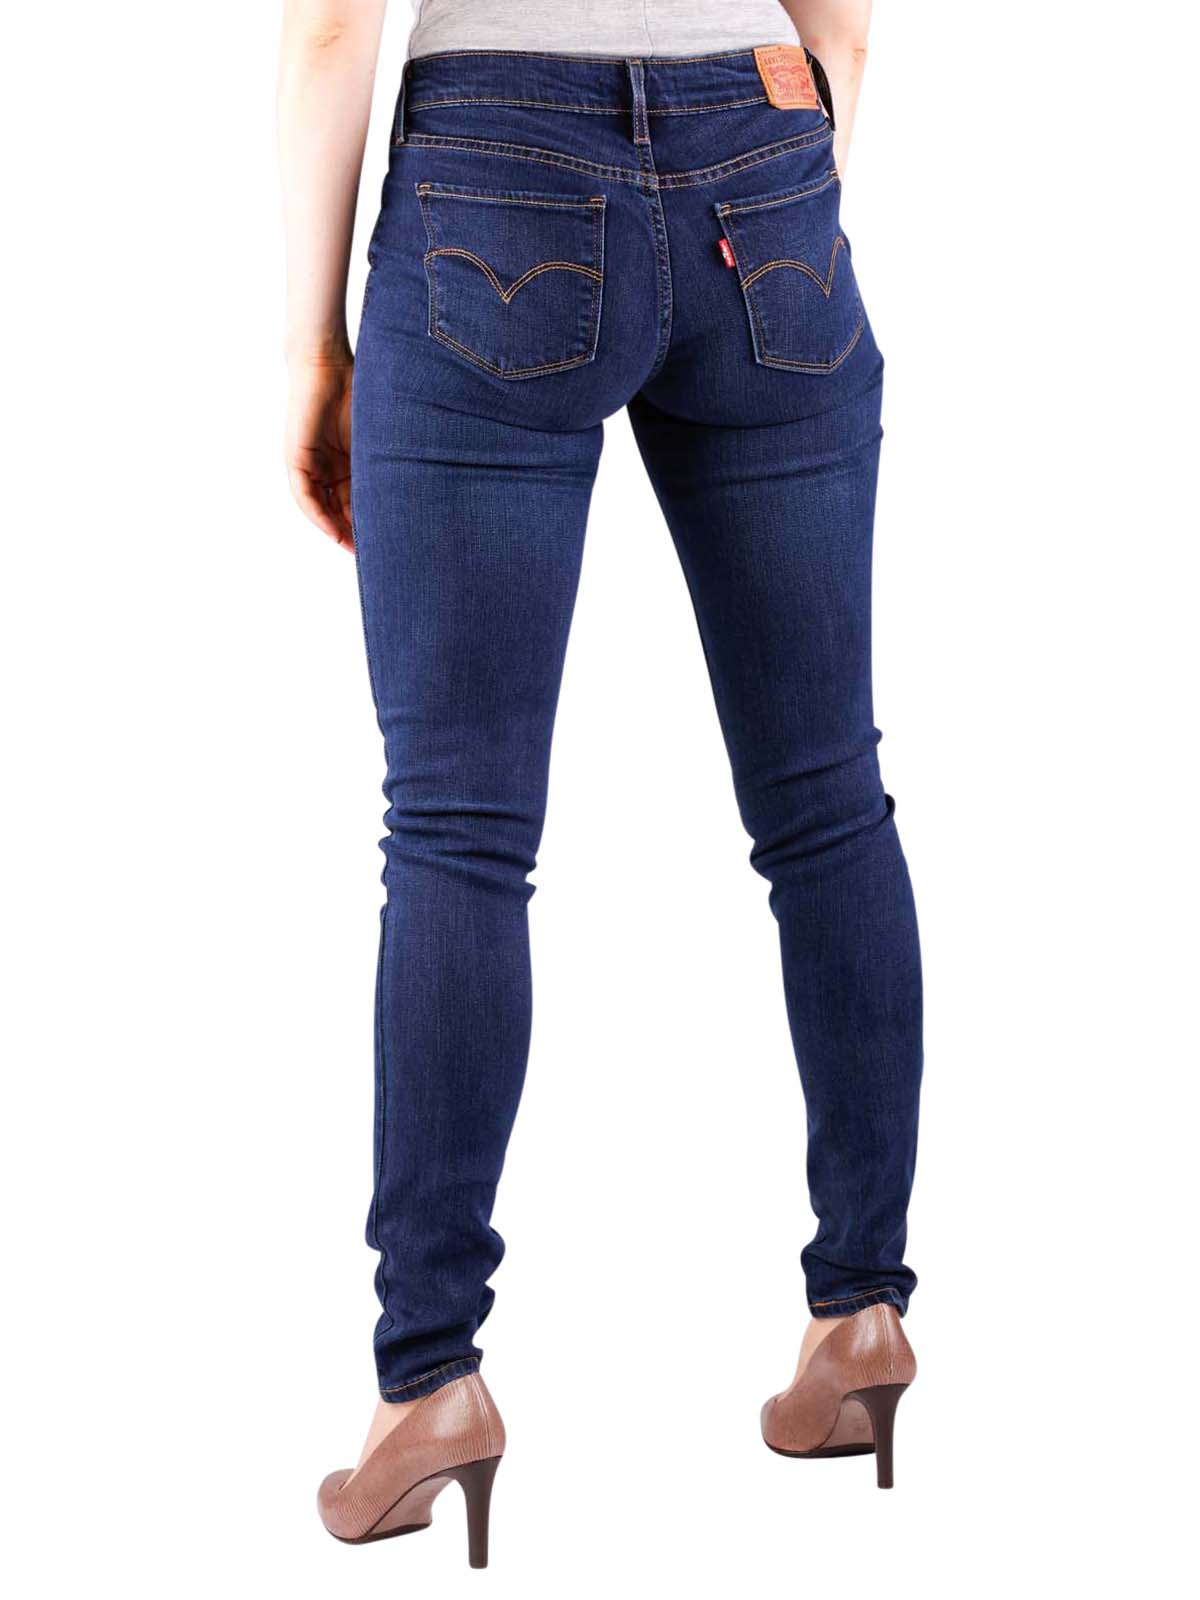 Levi's 711 Jeans Skinny city blues Levi's Women's Jeans | Free Shipping on   - SIMPLY LOOK GOOD